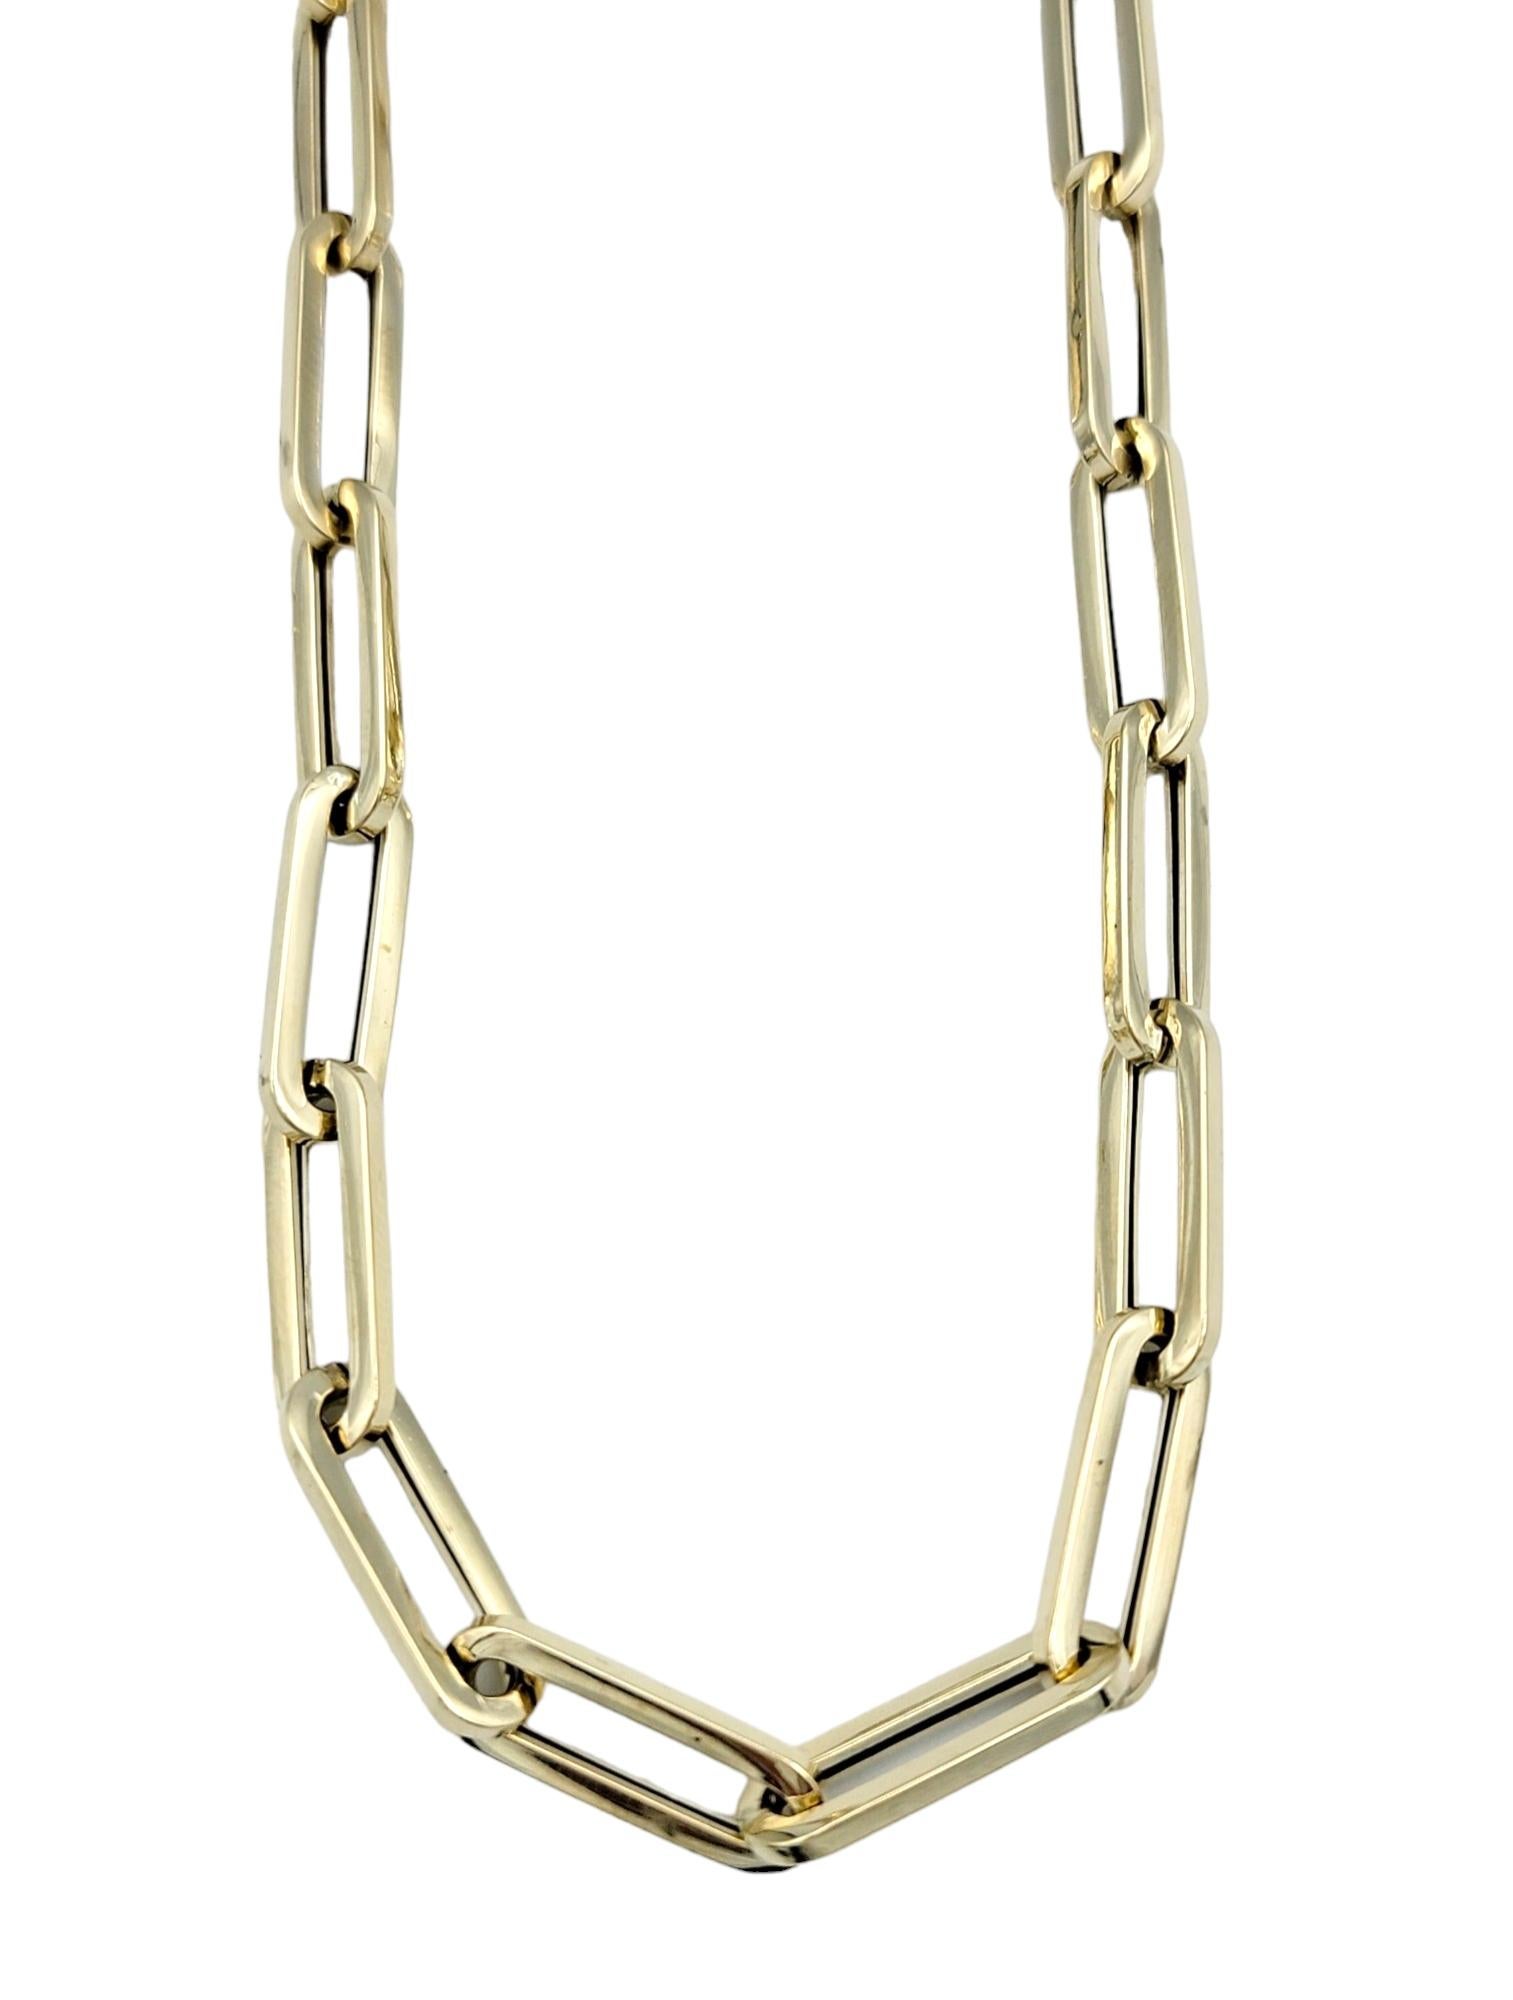 Elevate your style with our versatile paperclip link necklace crafted in luxurious 14K yellow gold. This sophisticated accessory seamlessly blends modern design with timeless elegance, creating a statement piece that effortlessly transitions from